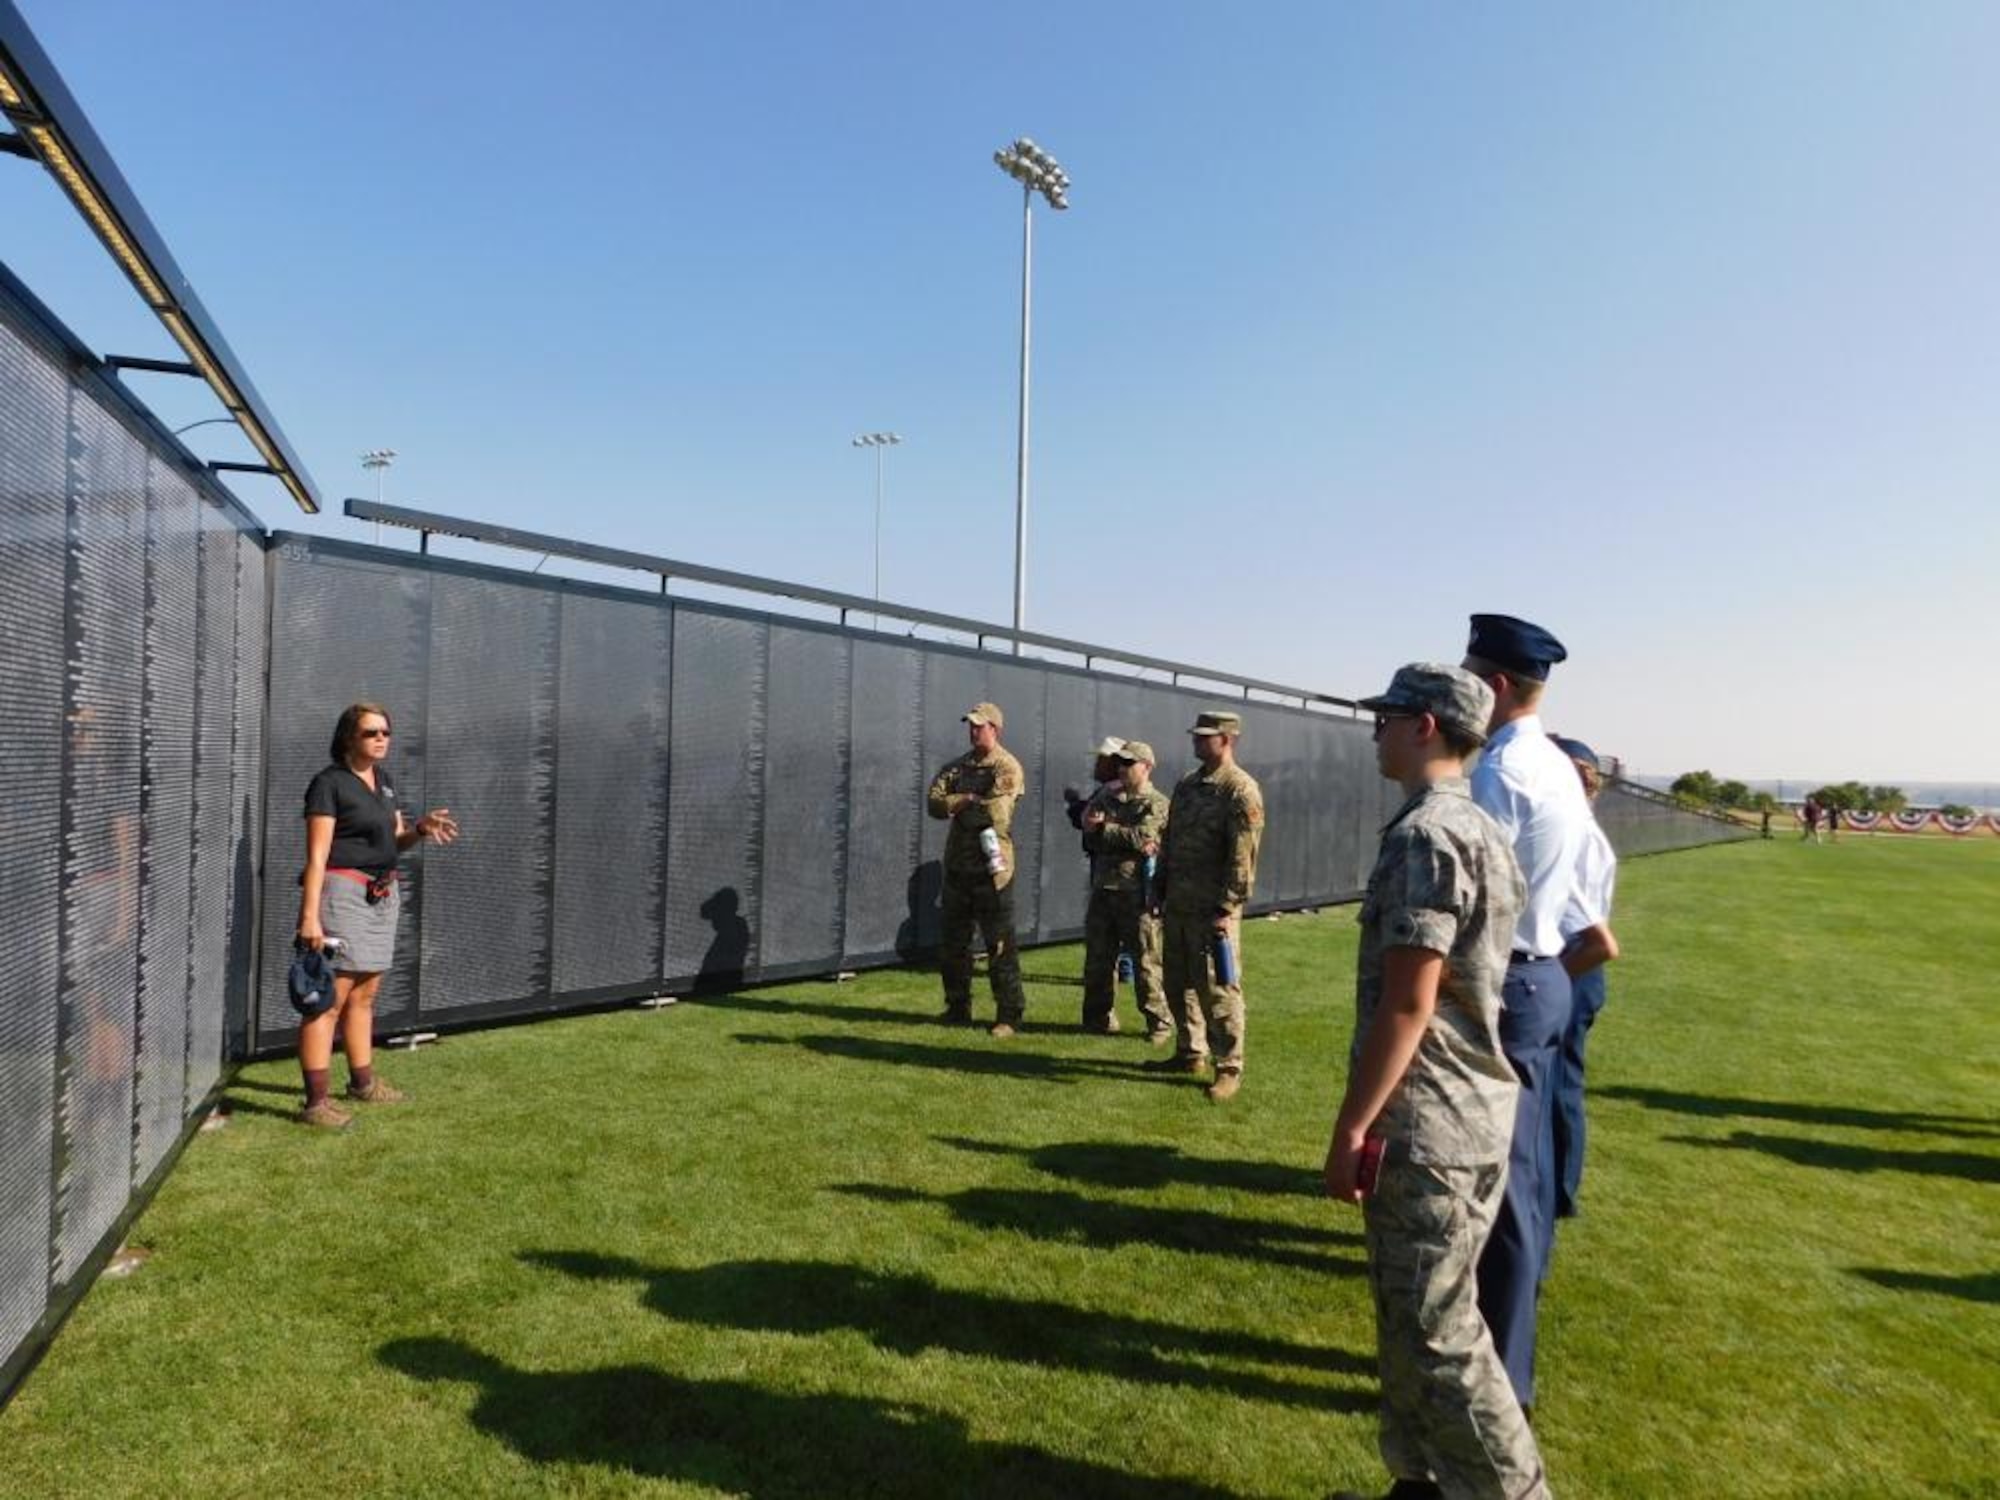 A civilian woman speaks to Airmen and cadets at a replica of the Vietnam memorial Wall.